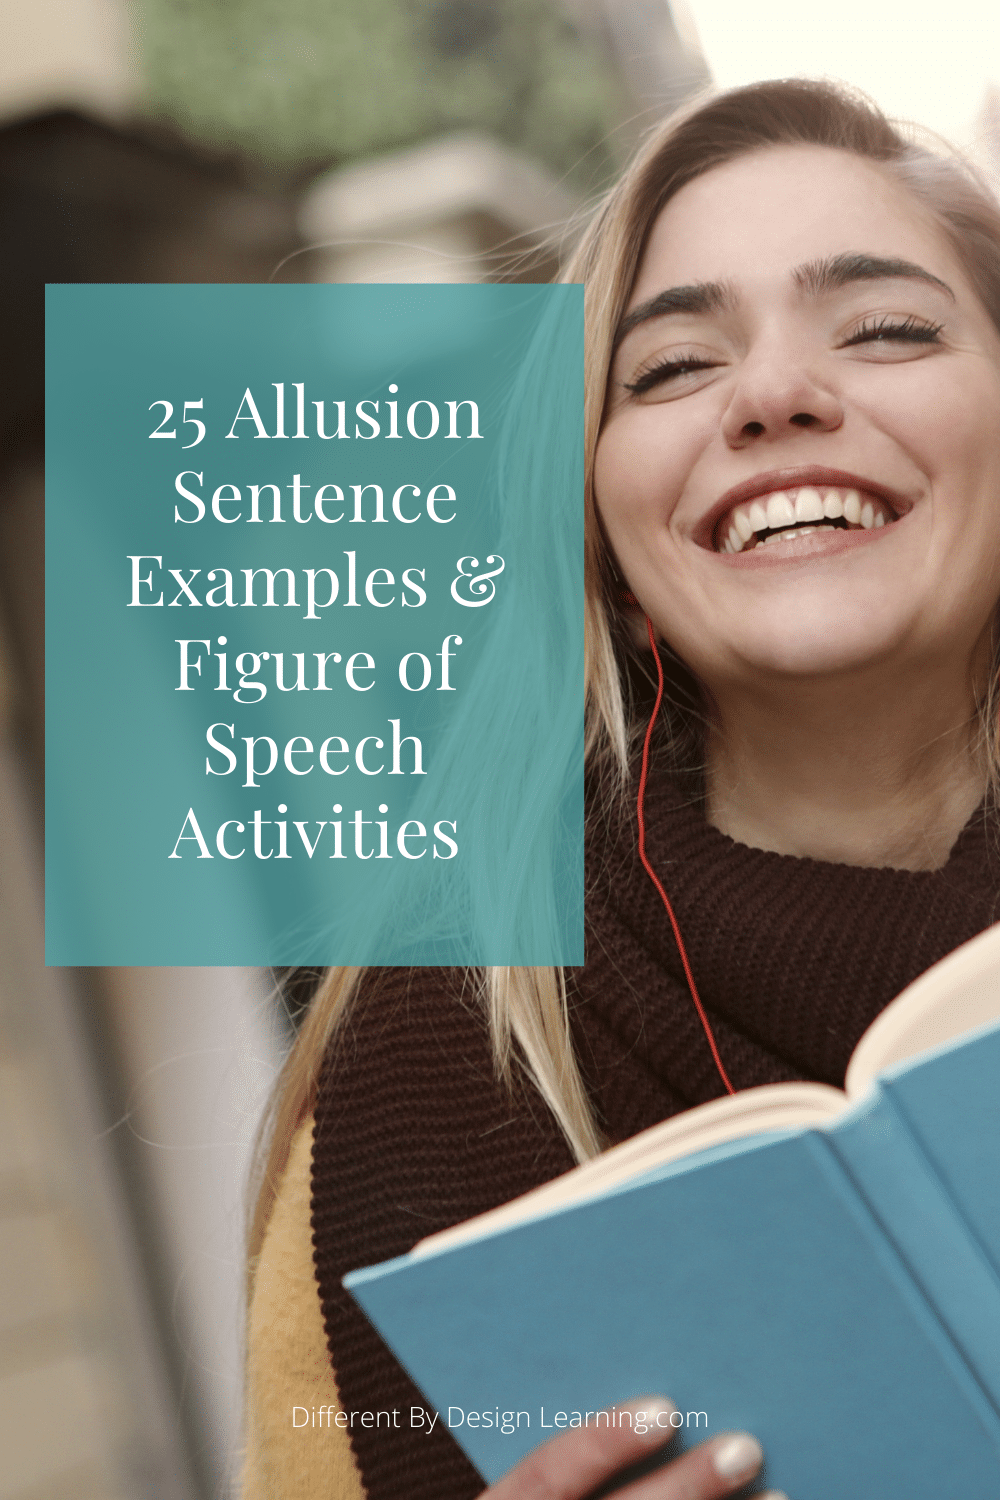 25-allusion-sentence-examples-and-figure-of-speech-activities